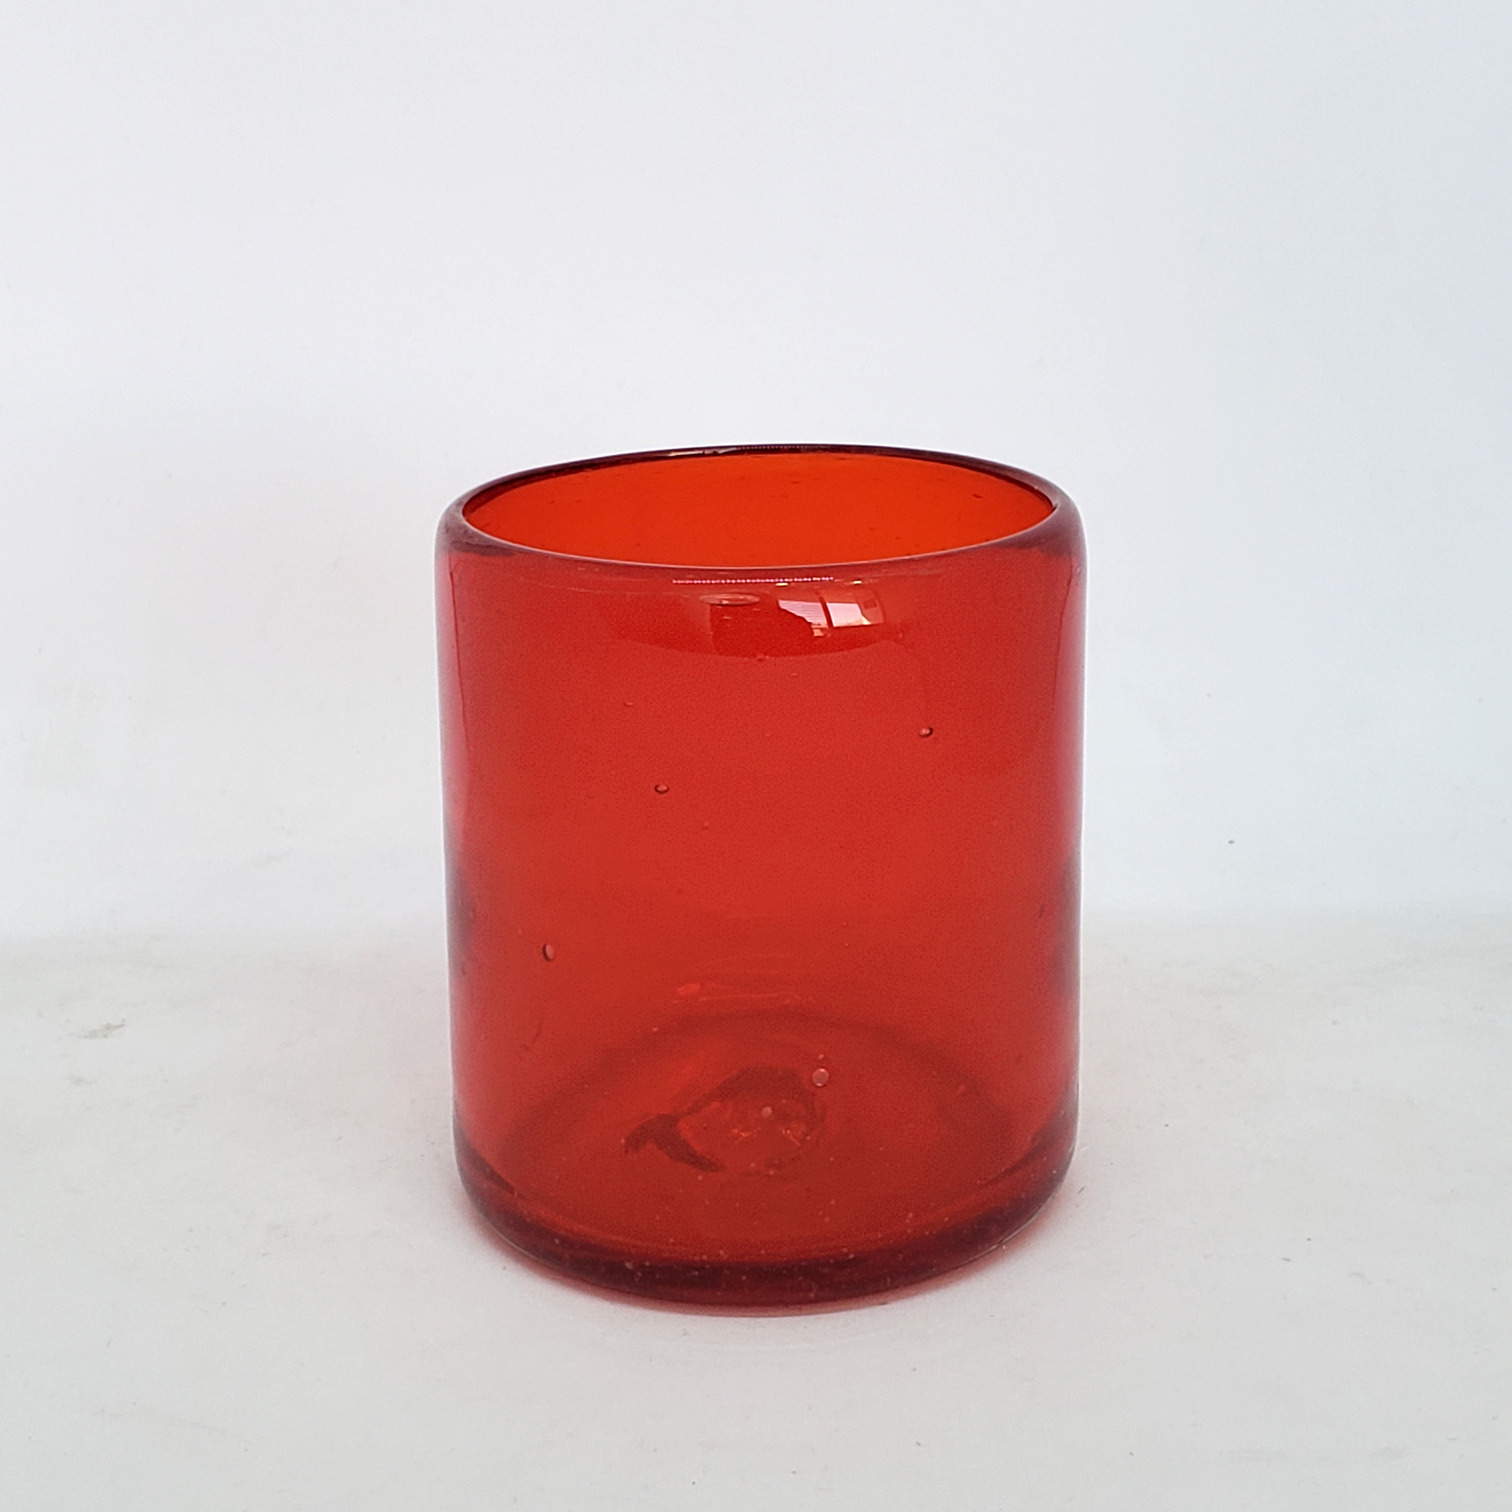 New Items / Solid Ruby Red 9 oz Short Tumblers (set of 6) / Enhance your favorite drink with these colorful handcrafted glasses.